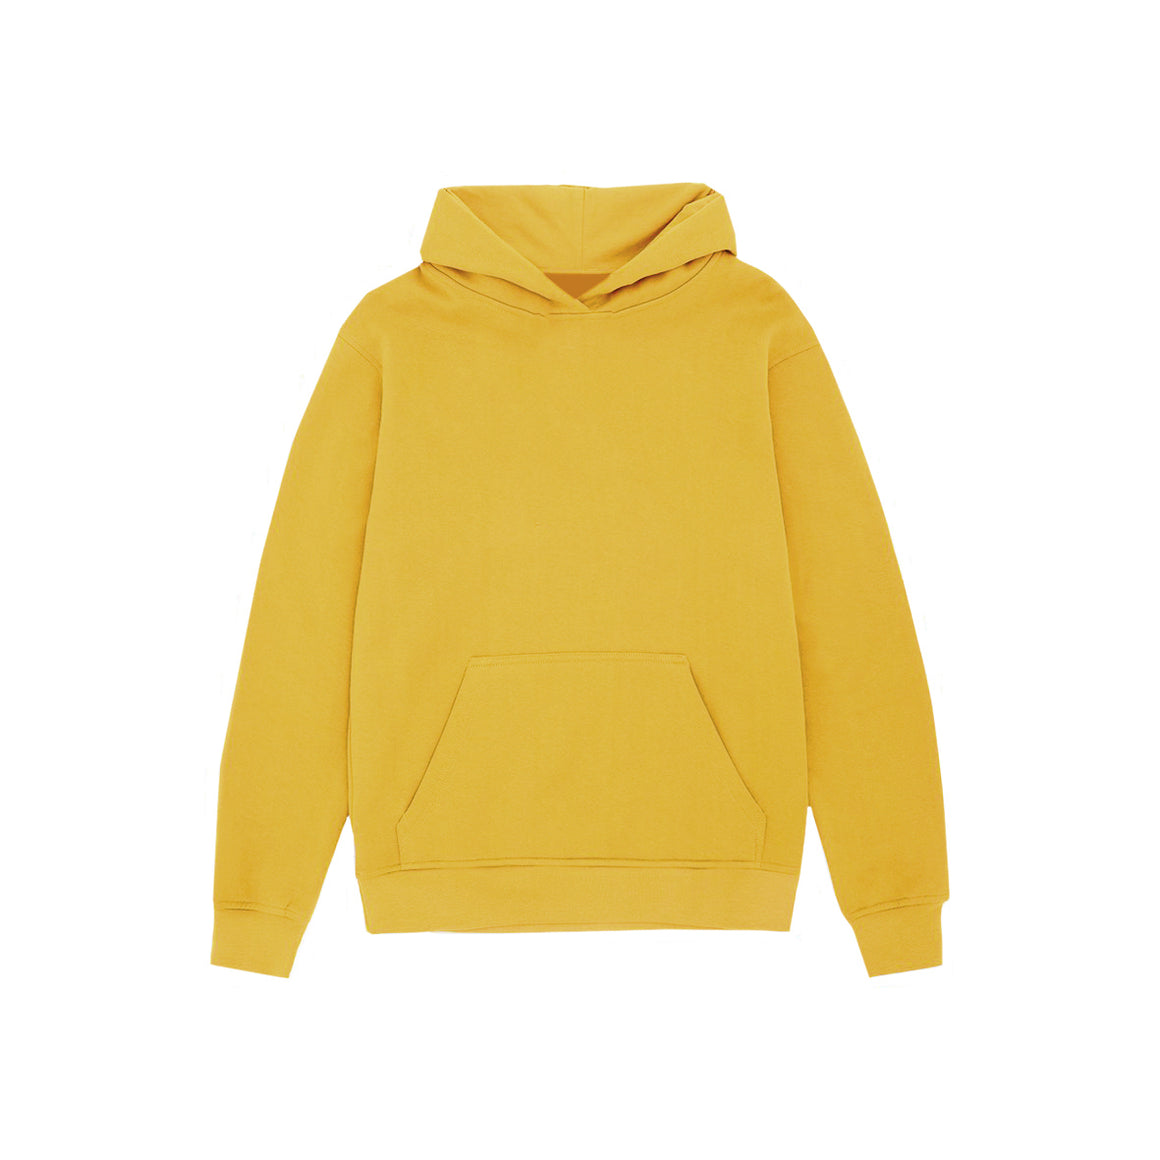 54 FLORAL PREMIUM PULLOVER HOODY - GOLD YELLOW